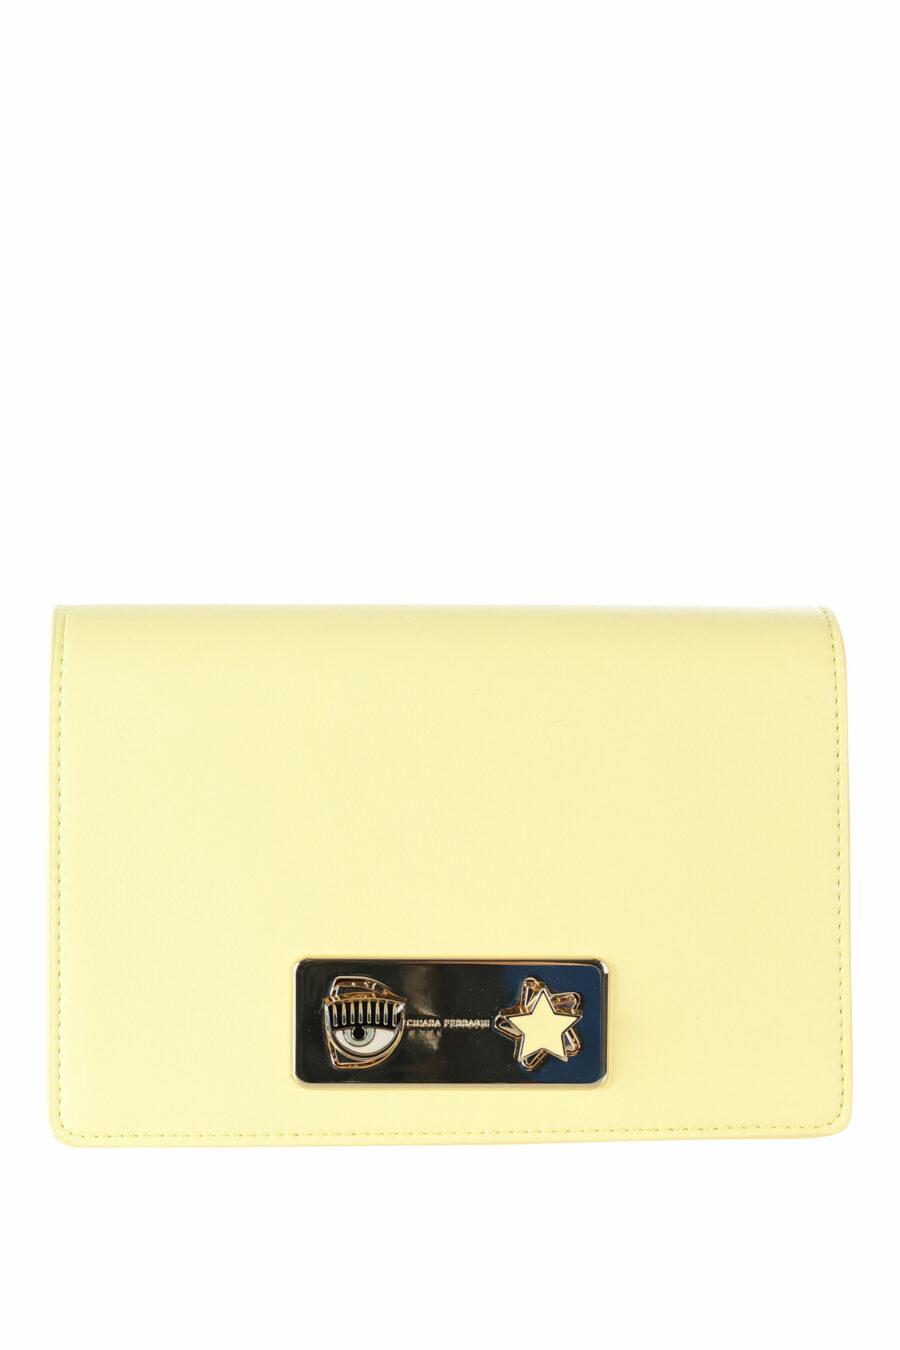 Yellow shoulder bag with eye lock and metal star - 8052672351906